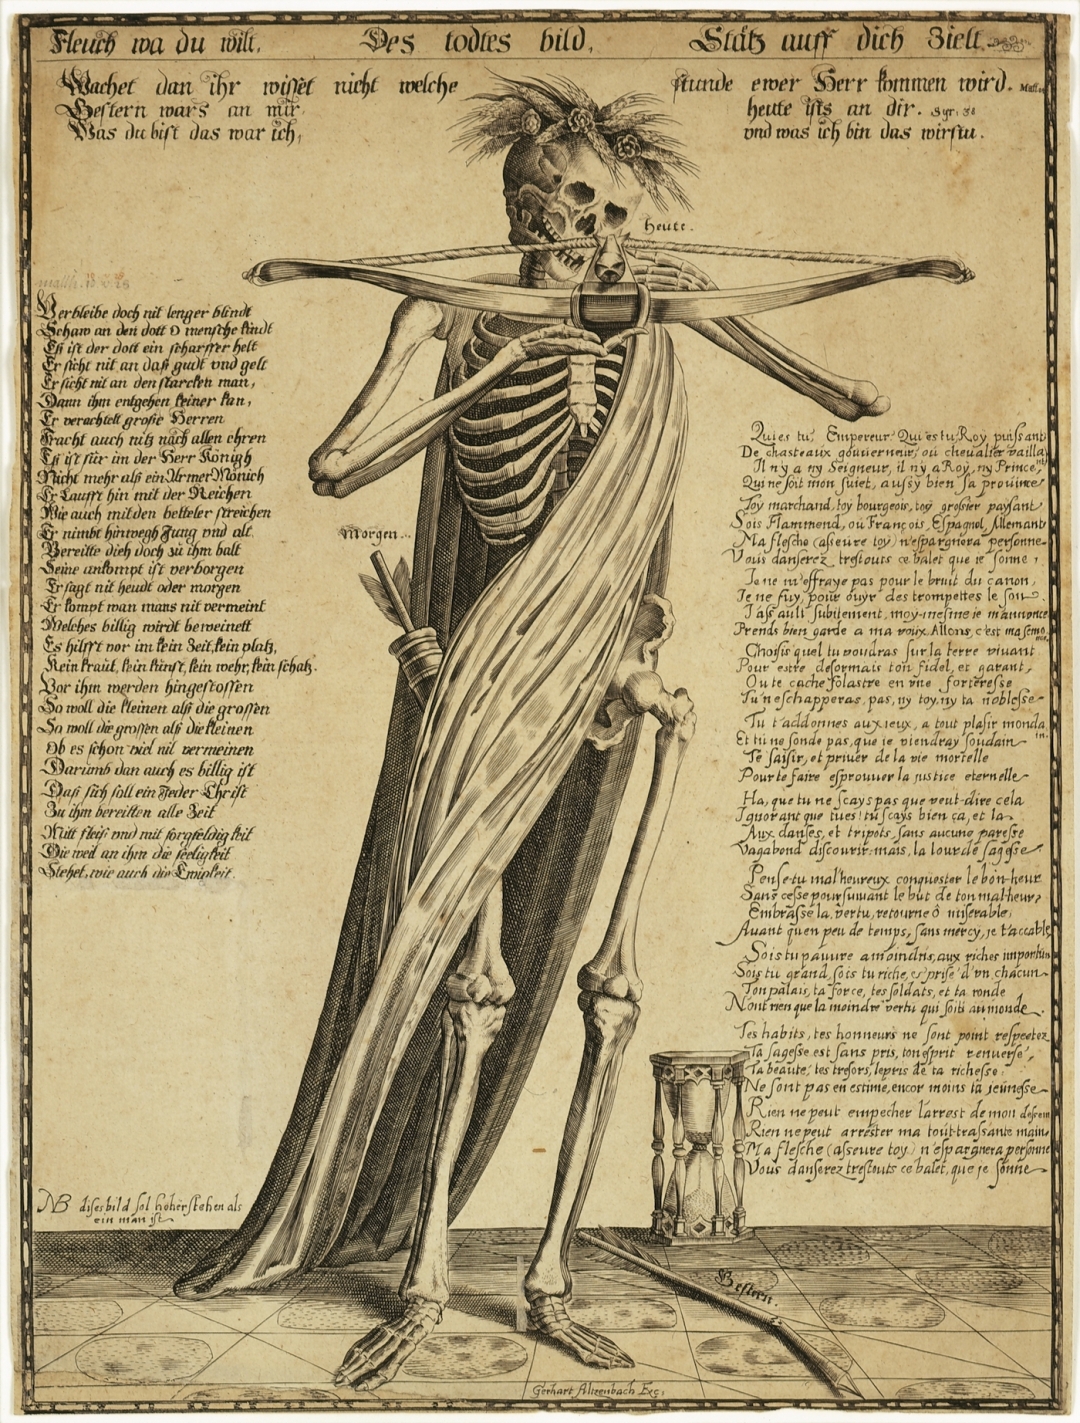 Gerhard Altzenbach, Death with a Crossbow or Death Stays on Target(1635), engraving, Blanton Museum of Art, the University of Texas at Austin